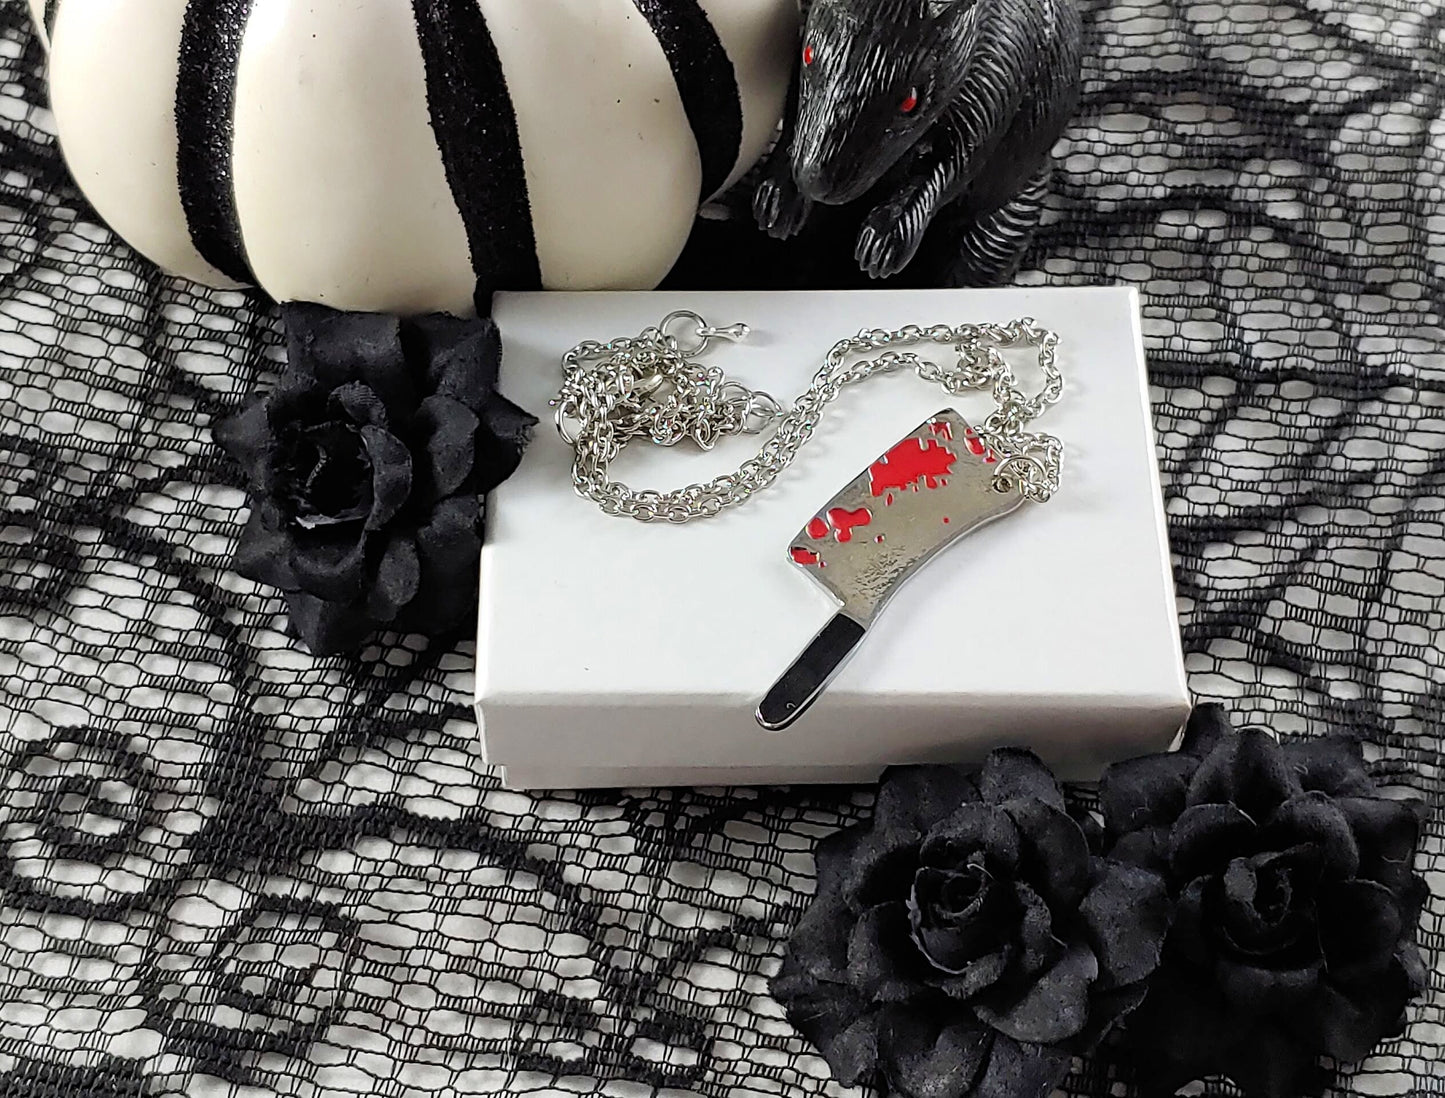 Bloody Butcher Knife Necklace |  Gory Gore Necklace | Spooky Slice of Horror | Horror Jewelry